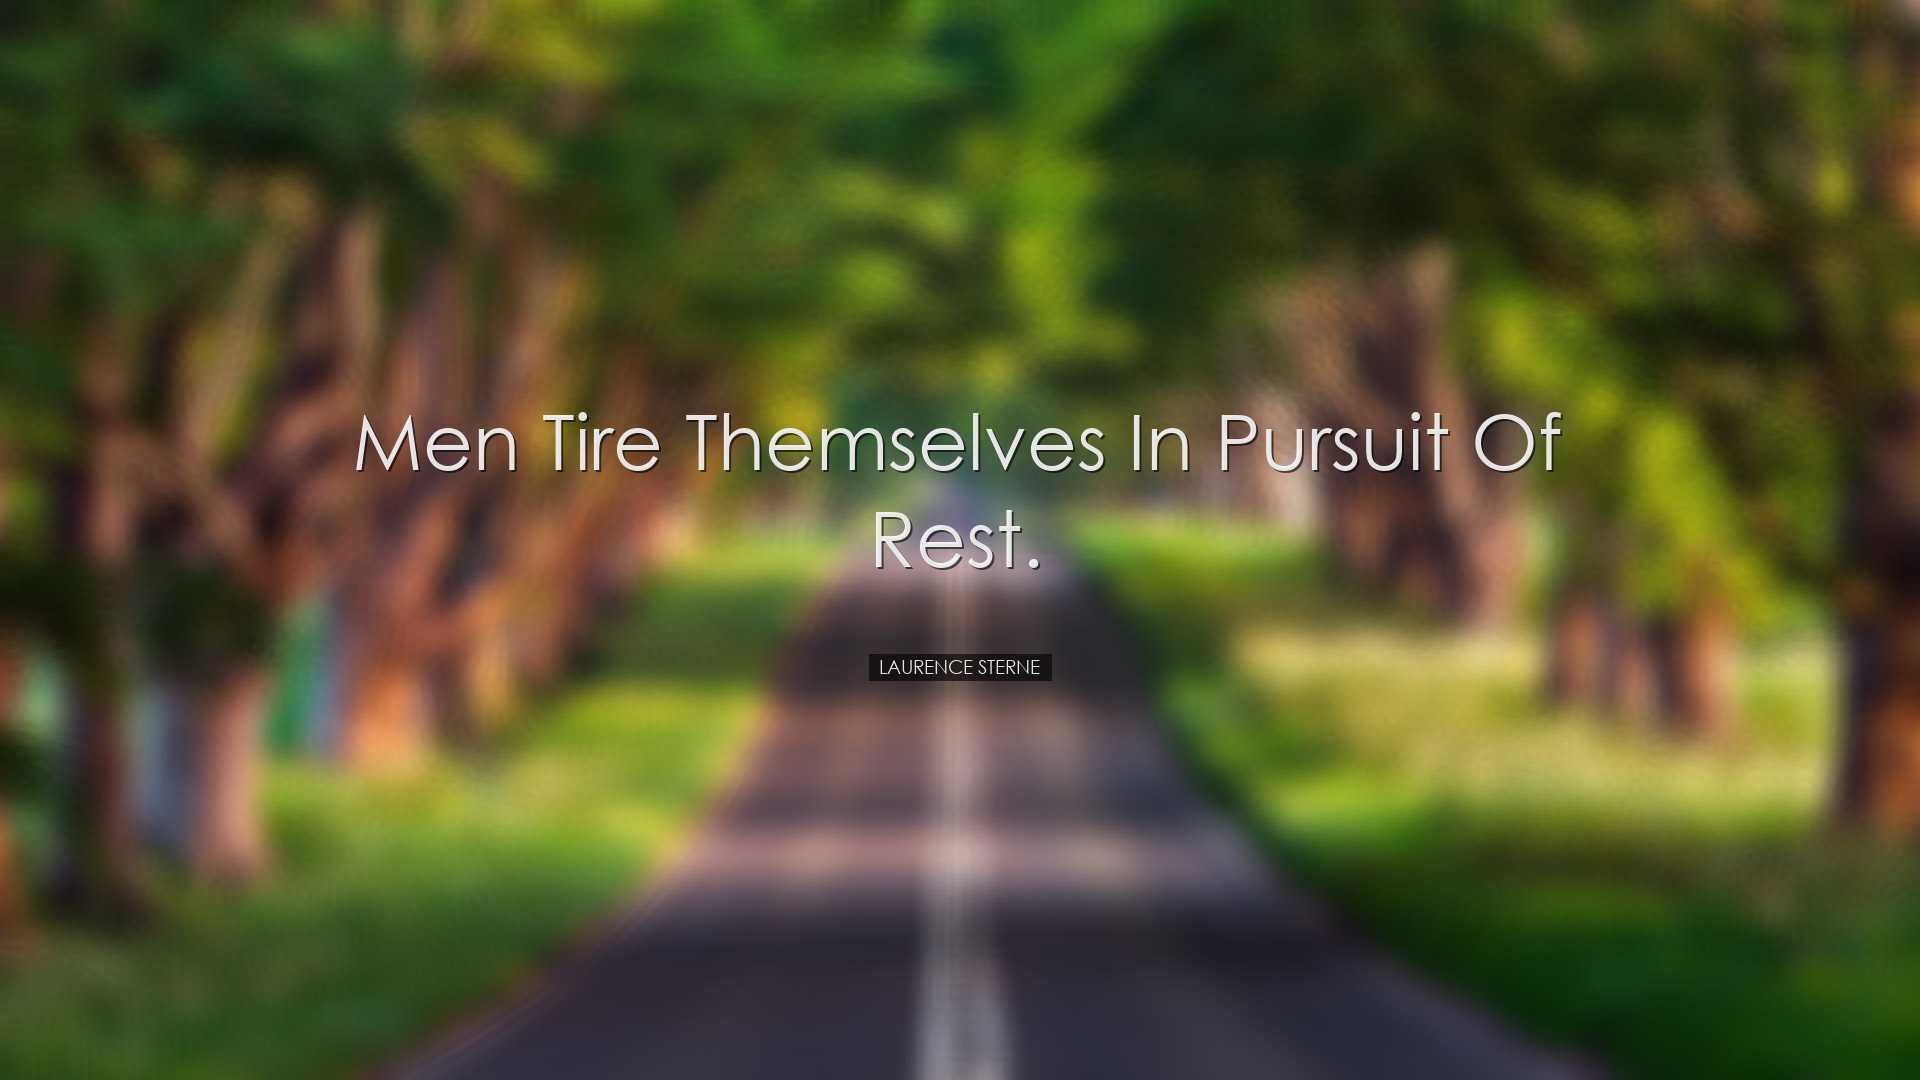 Men tire themselves in pursuit of rest. - Laurence Sterne